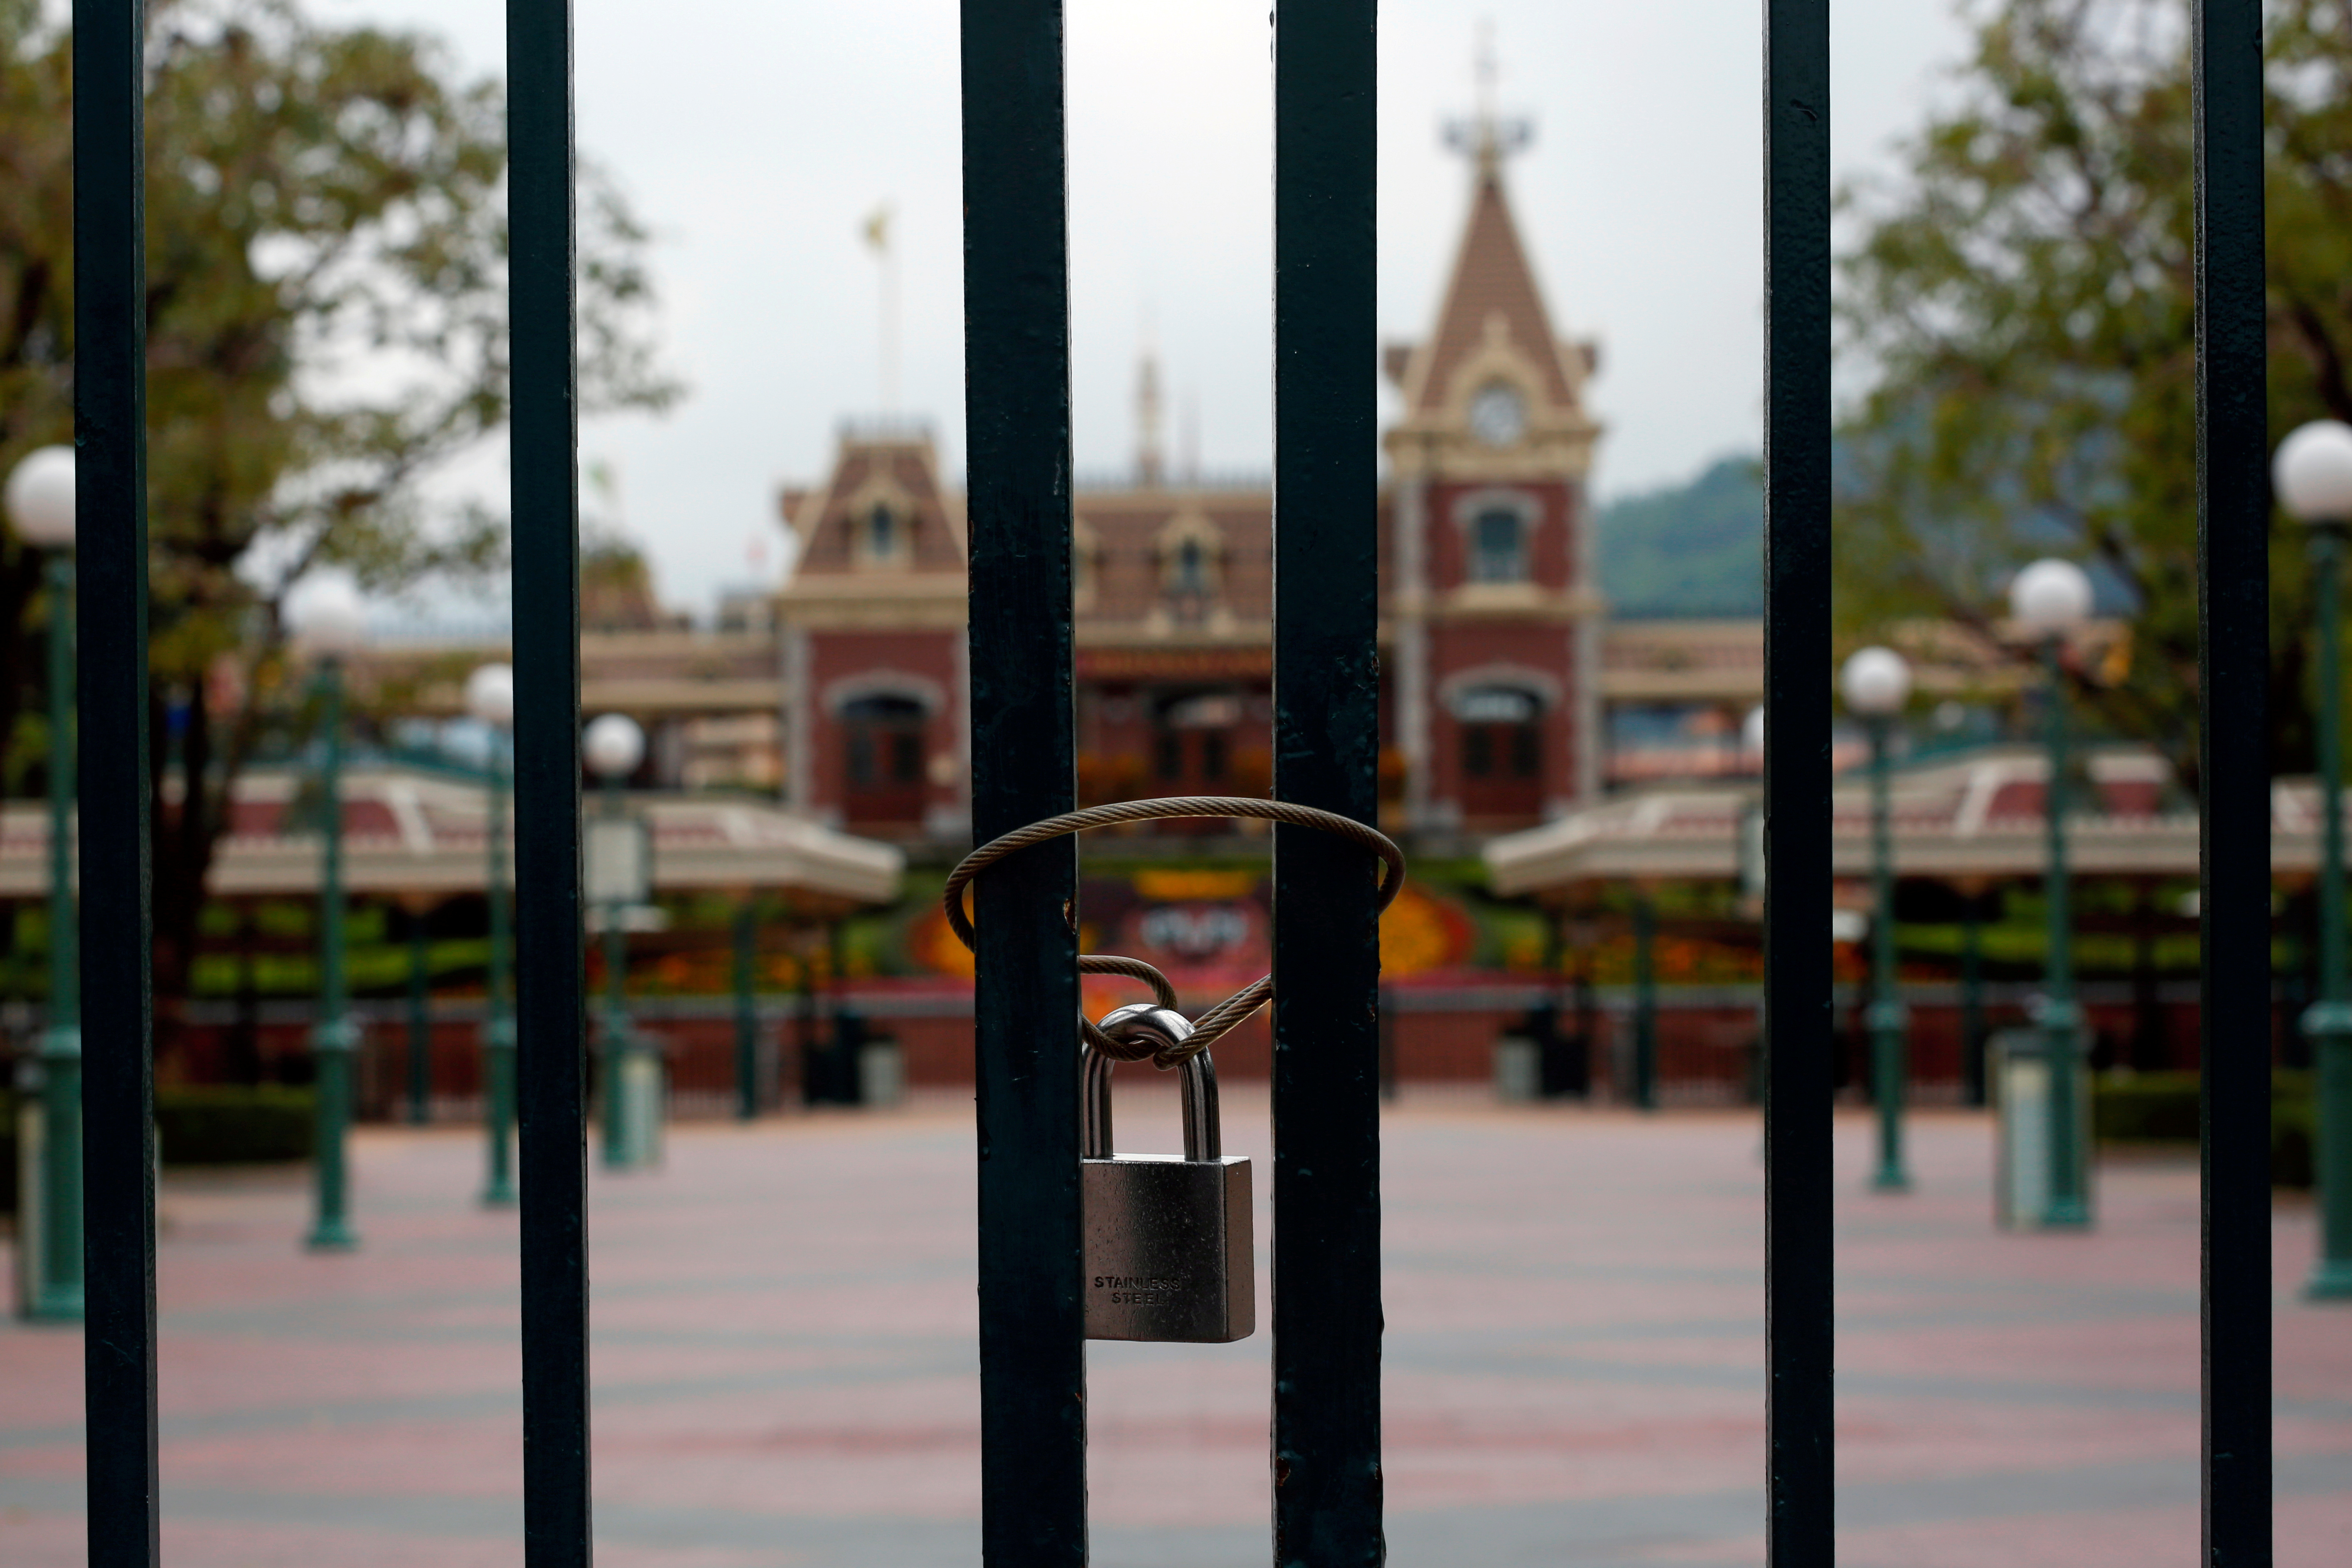 A locked gate is seen after the Hong Kong Disneyland theme park has been closed, following the coronavirus outbreak in Hong Kong, China January 26, 2020. REUTERS/Tyrone Siu/File Photo